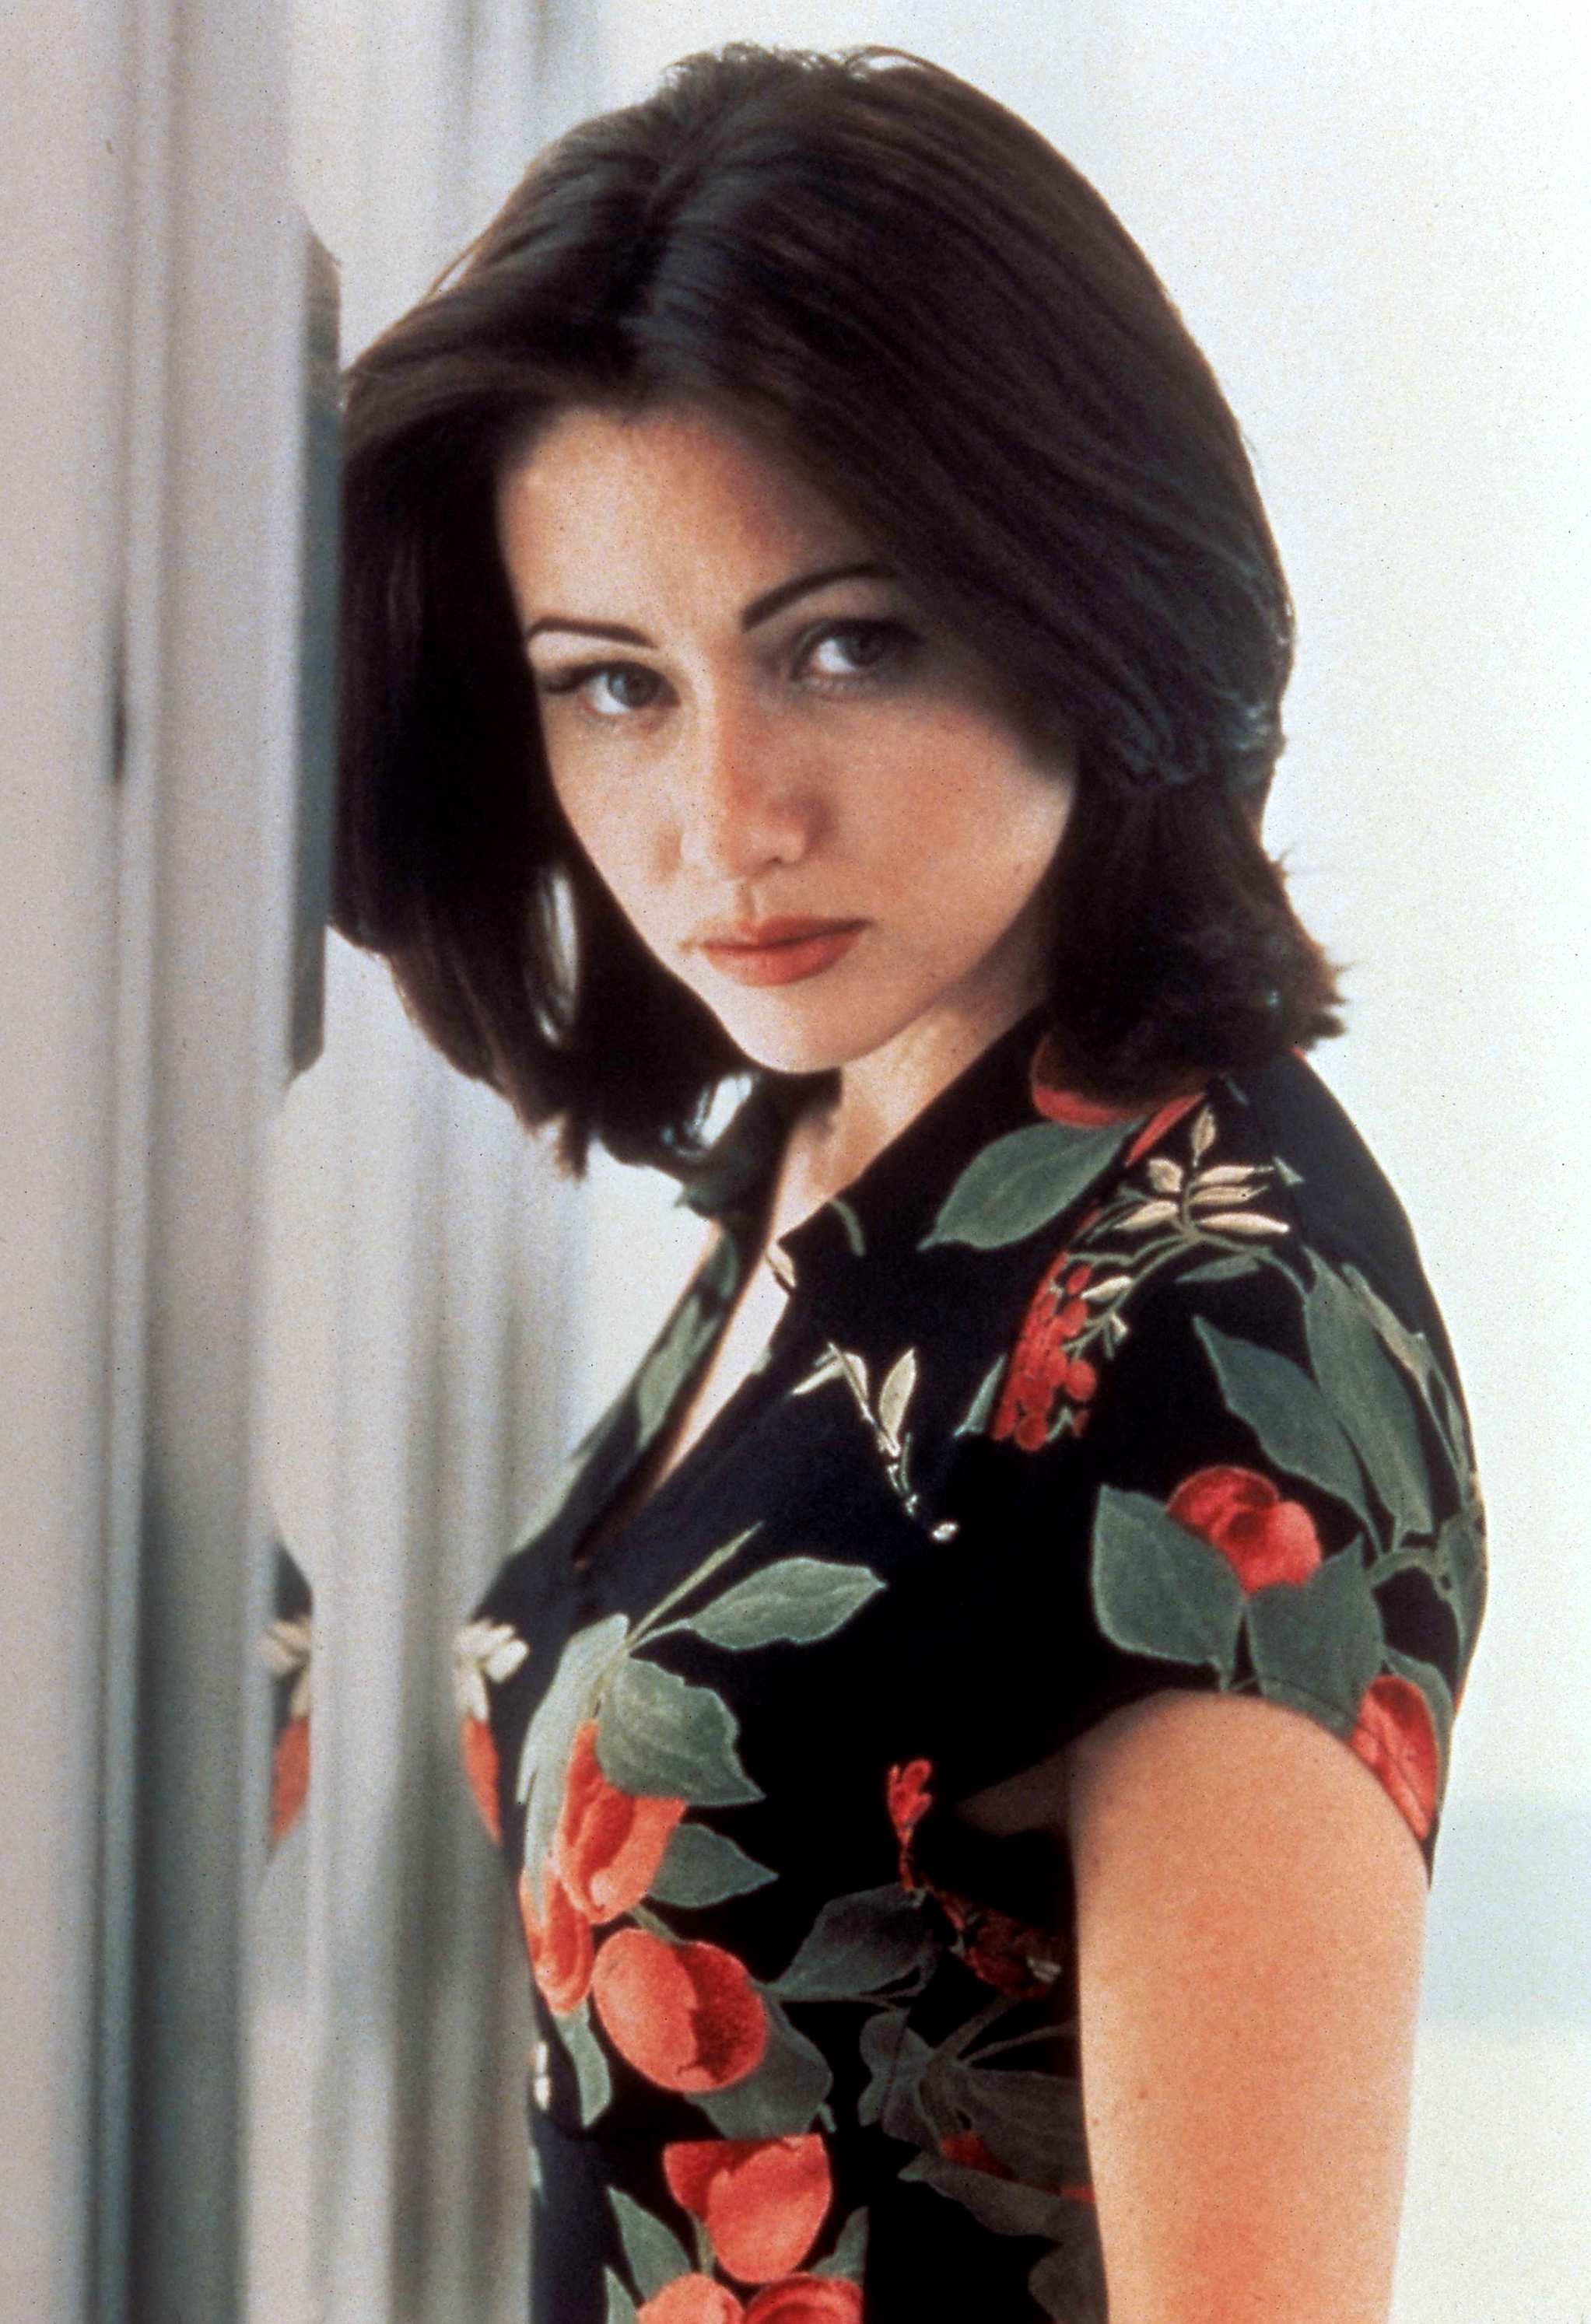 Shannen Doherty photo 99 of 287 pics, wallpaper - photo #128702 - ThePlace22045 x 2988